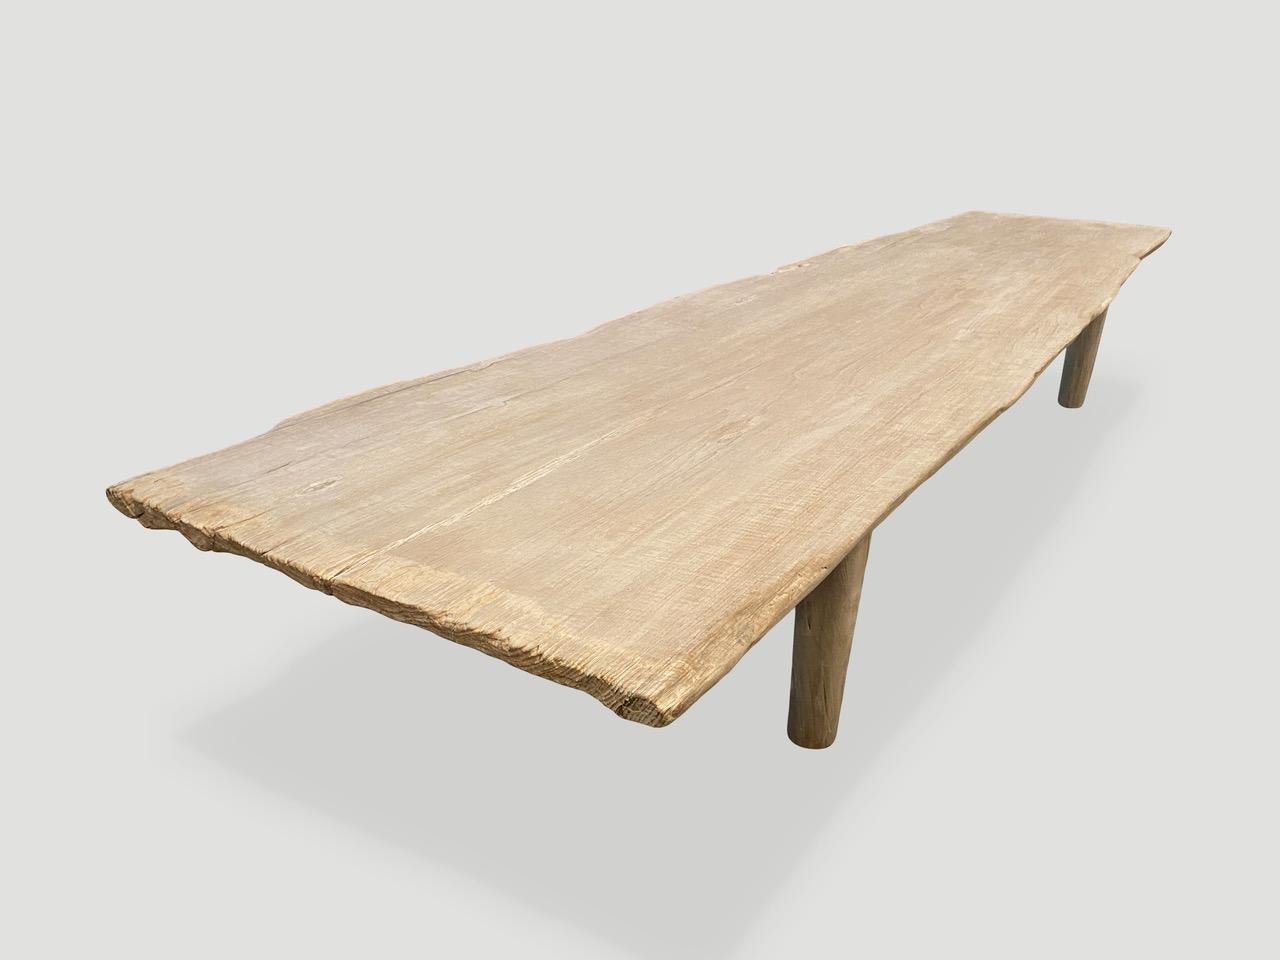 Andrianna Shamaris White Washed Live Edge Teak Wood Coffee Table or Bench In Excellent Condition For Sale In New York, NY